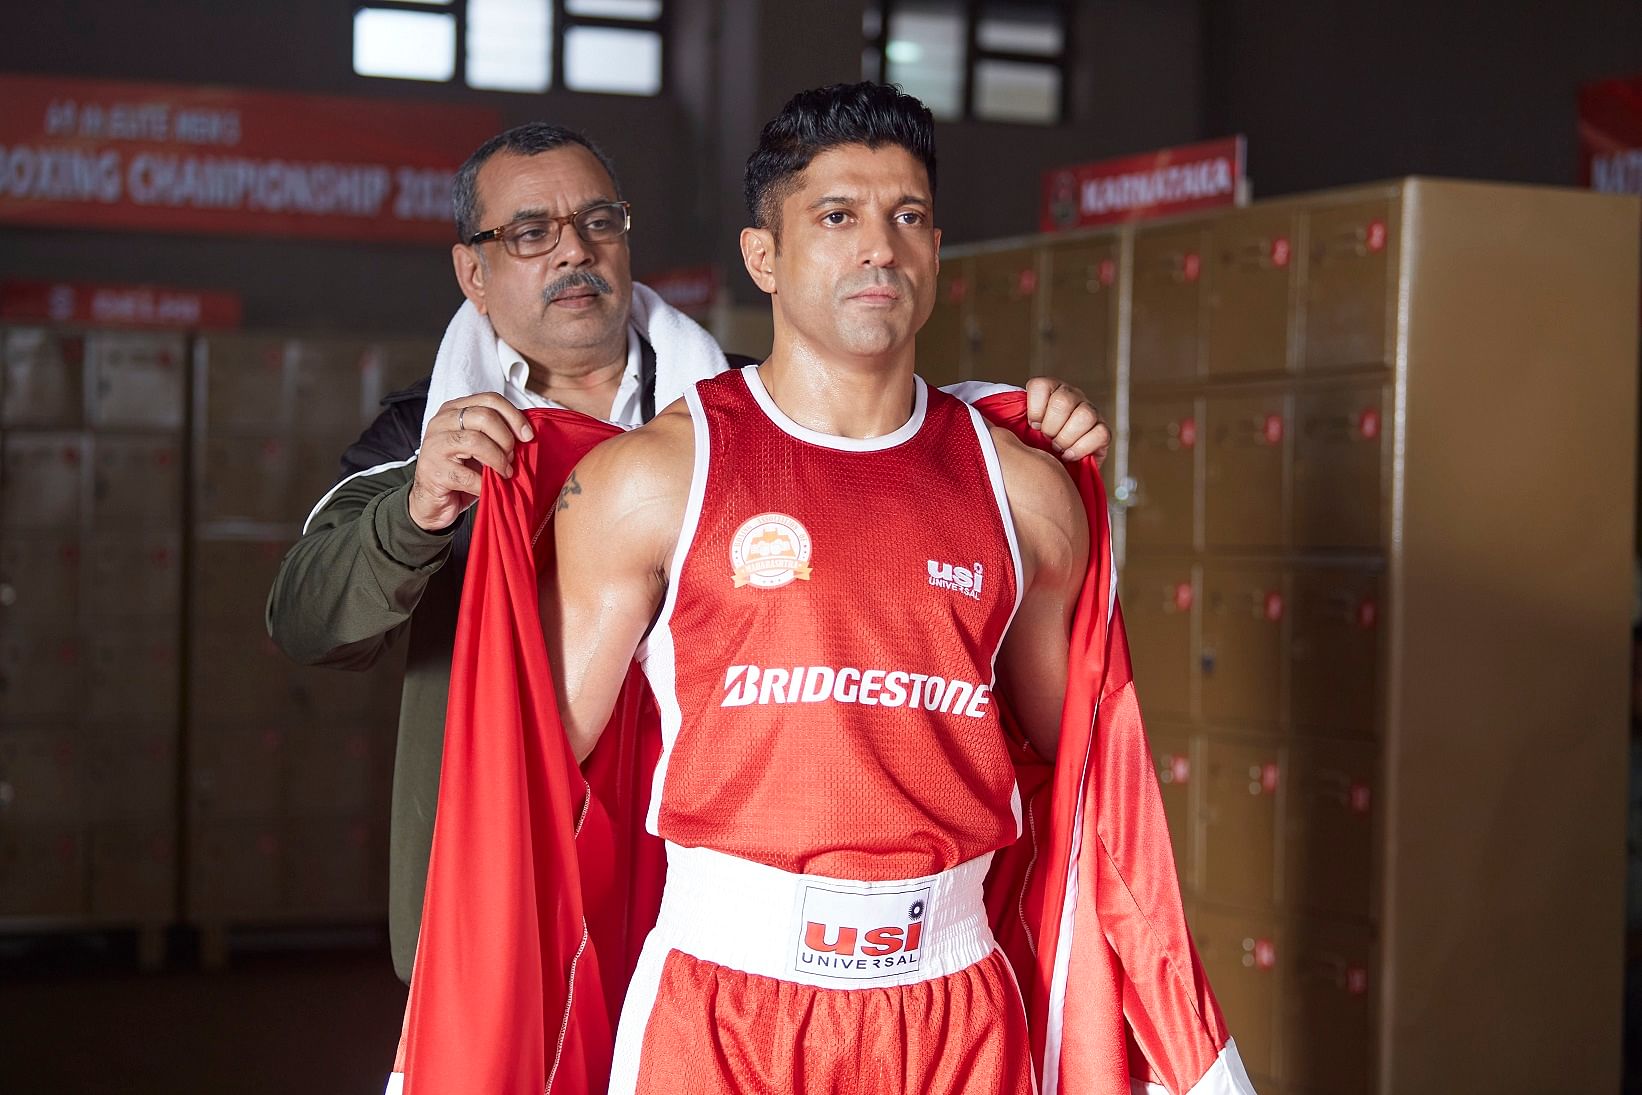 Farhan Akhtar plays a boxer while Paresh Rawal plays his coach in ‘Toofan’. The Hindi film will be out on Amazon Prime Video on July 16.